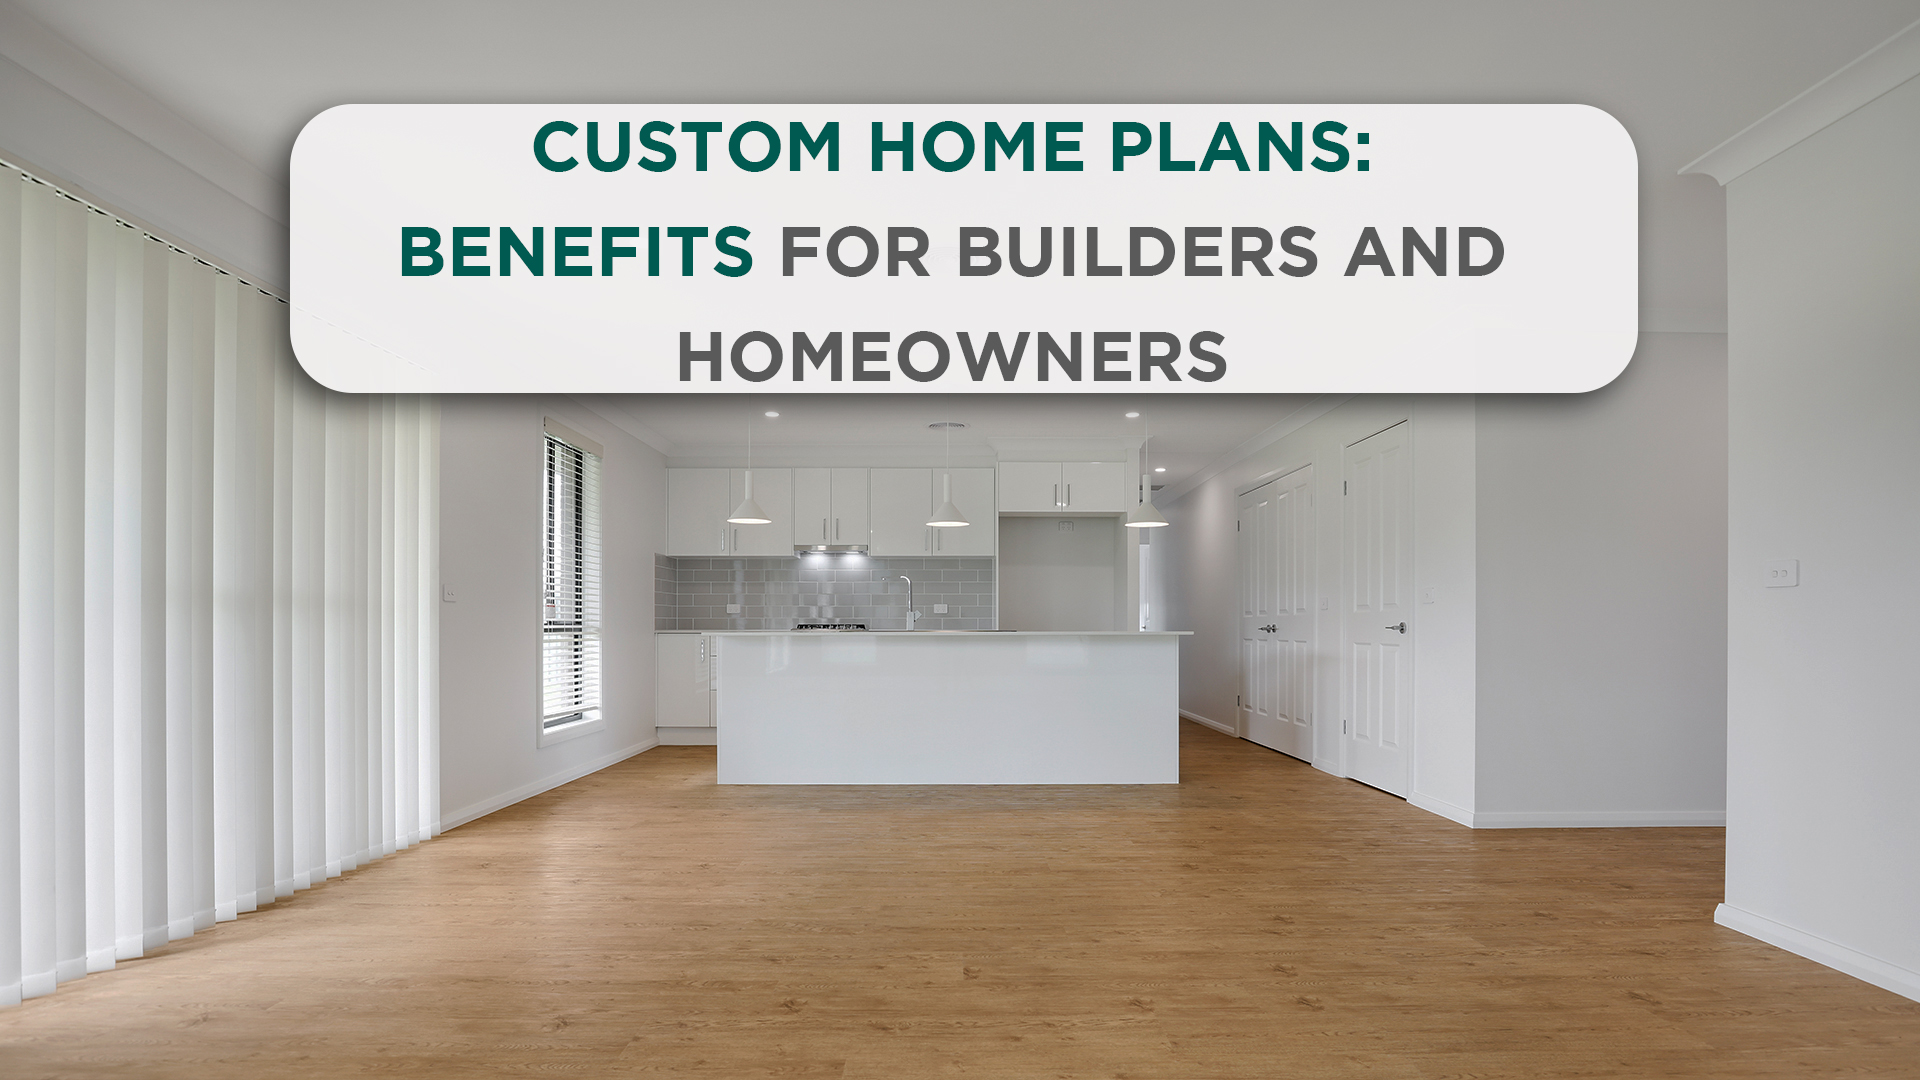 Custom Home Plans: Benefits for Builders and Homeowners